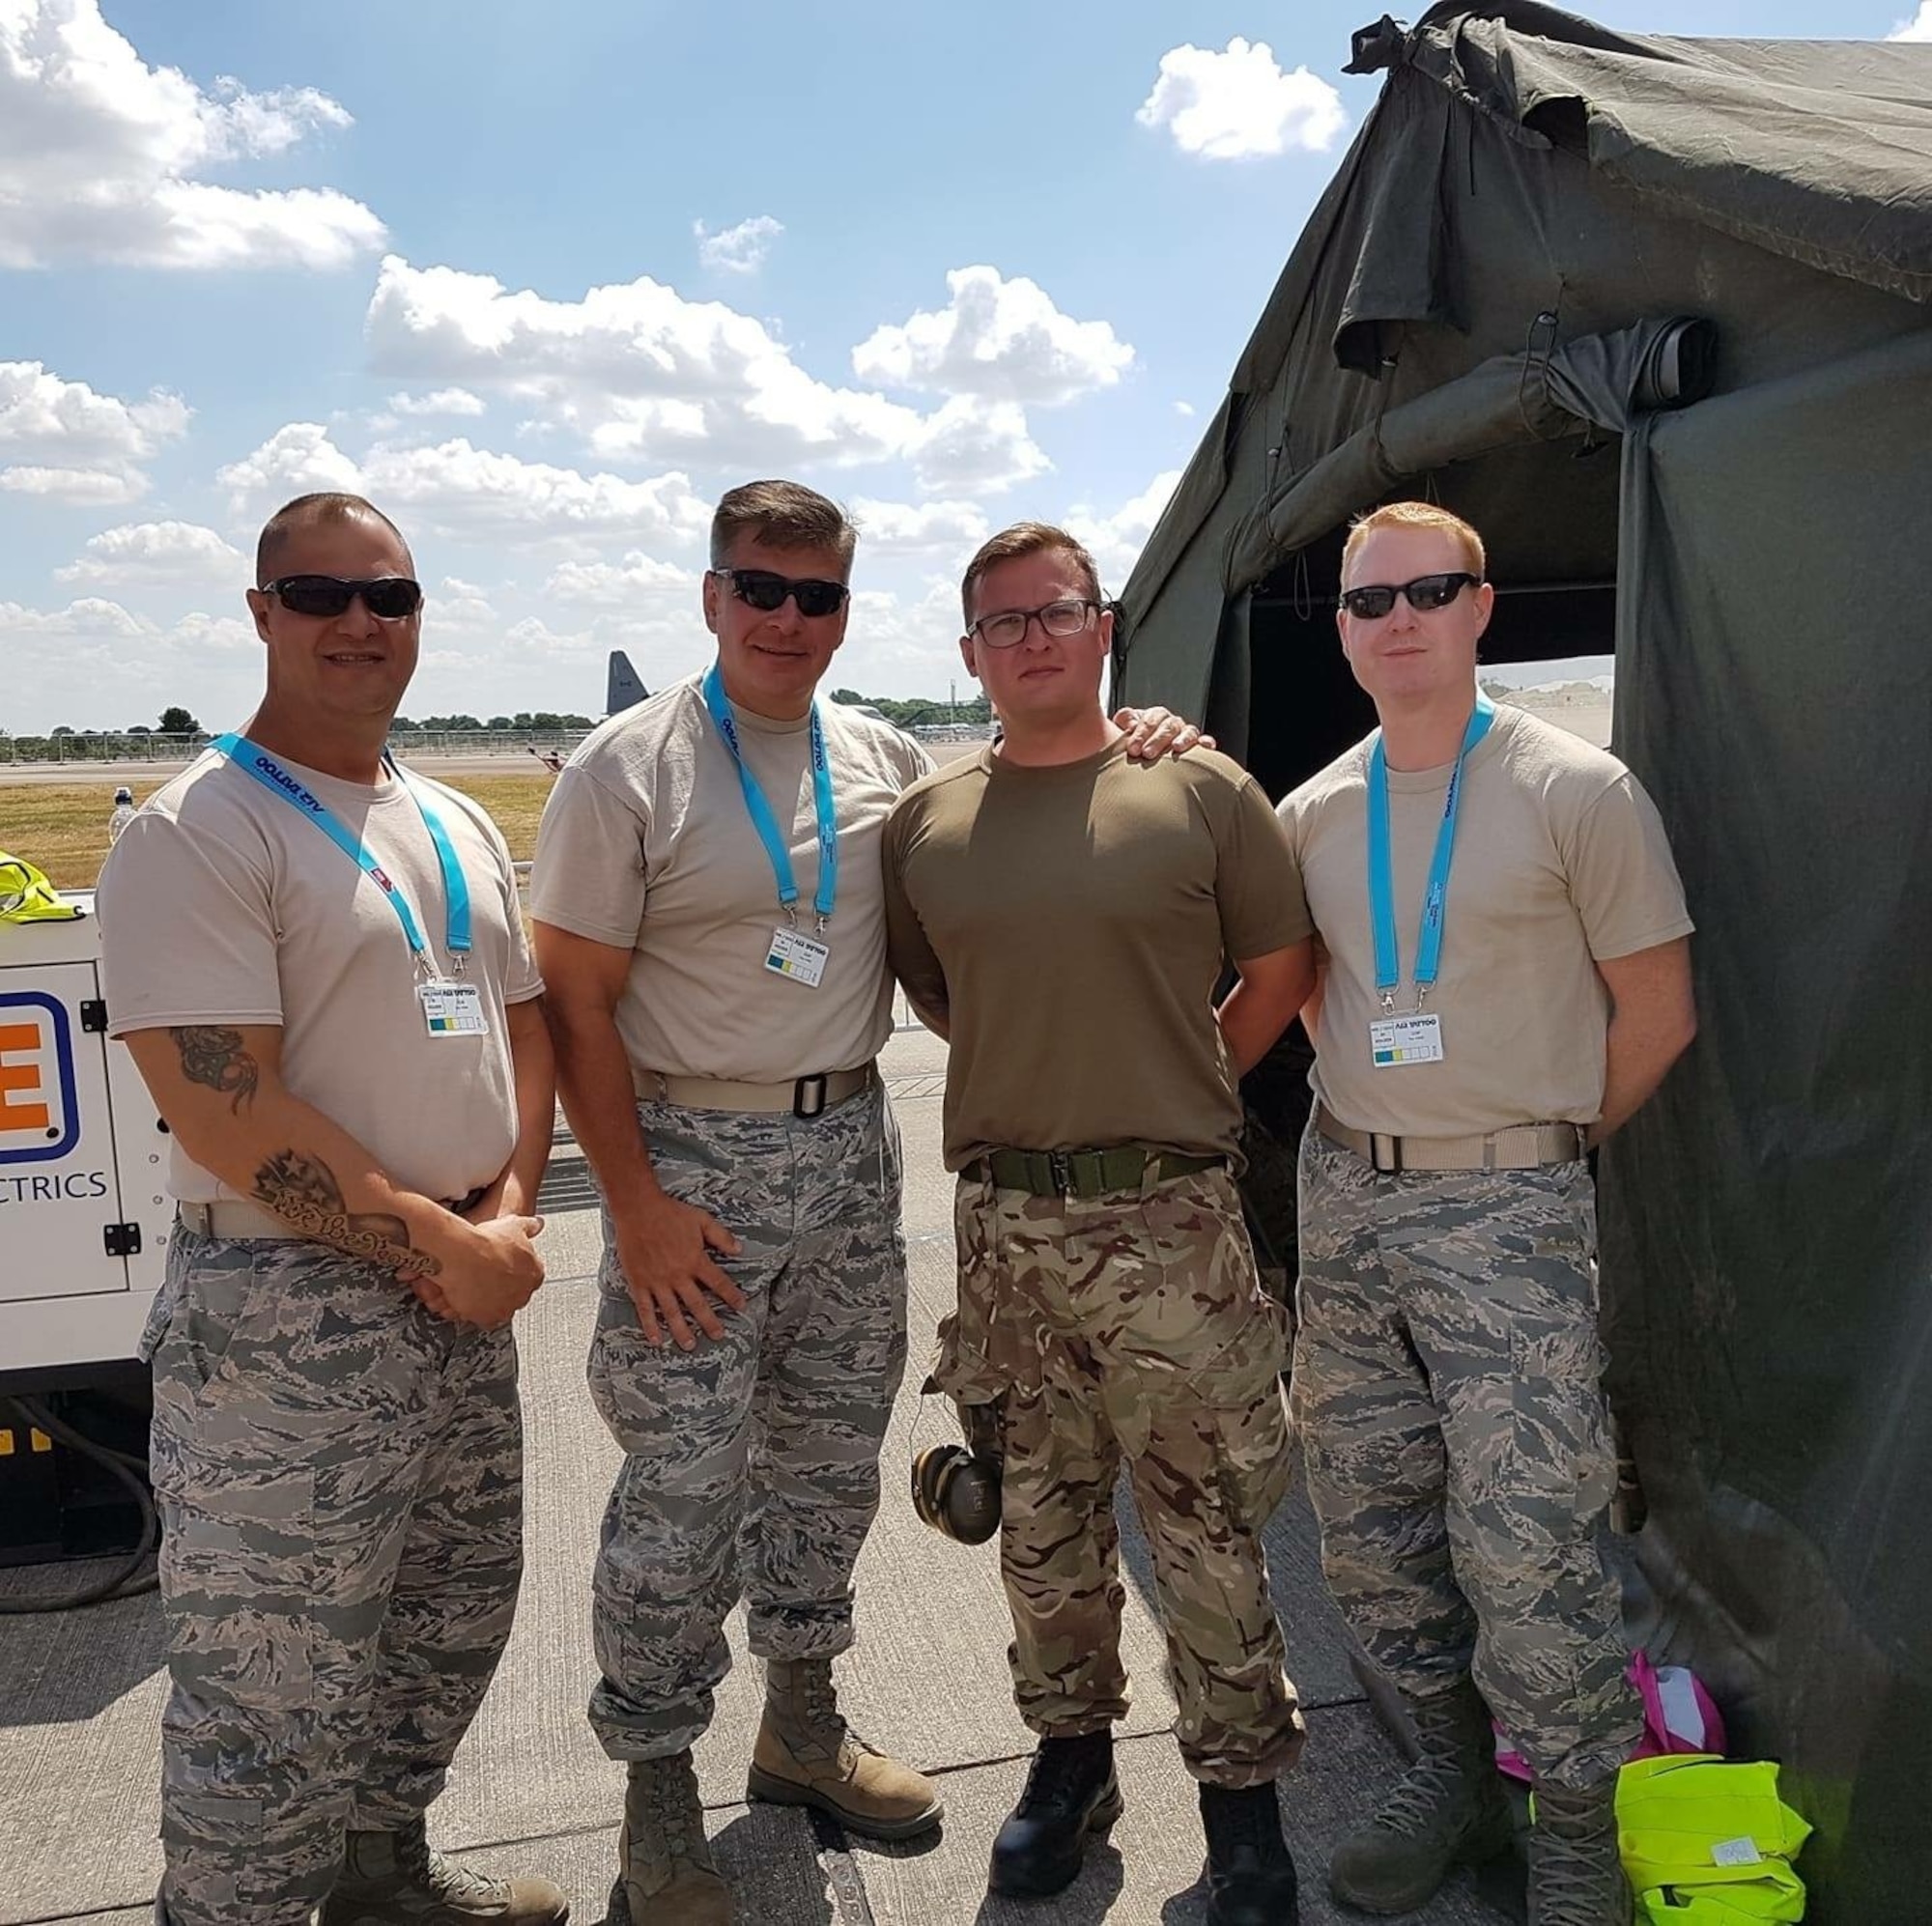 U.S. Air Force Staff Sgt. Jason Chipley (right), 145th Logistics Readiness Squadron, poses with members from the United States Air Force Reserves and Royal Air Force during the Air Tattoo air show at RAF Fairford, Fairford, United Kingdom, July 14, 2018. The Military Reserve Exchange Program not only allows military members to learn and exchange ideas about their respective career fields, but it also provides the opportunity to be immersed in the host country’s culture.